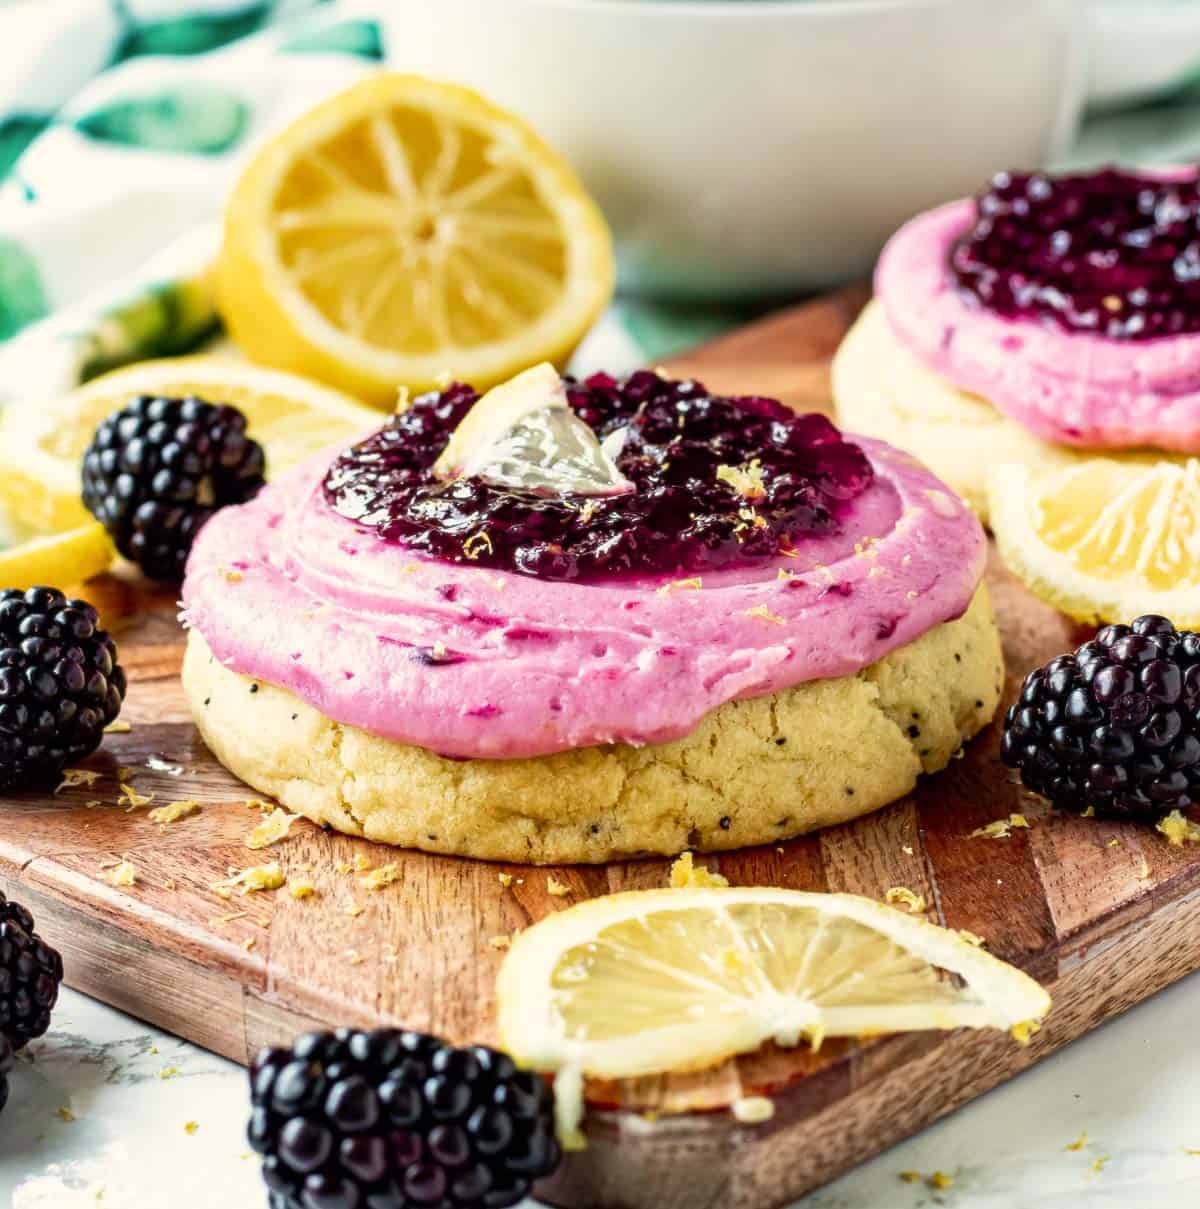 Baked Lemon Blackberry Cookie with frosting on wooden cutting board with lemon slices and blackberries.